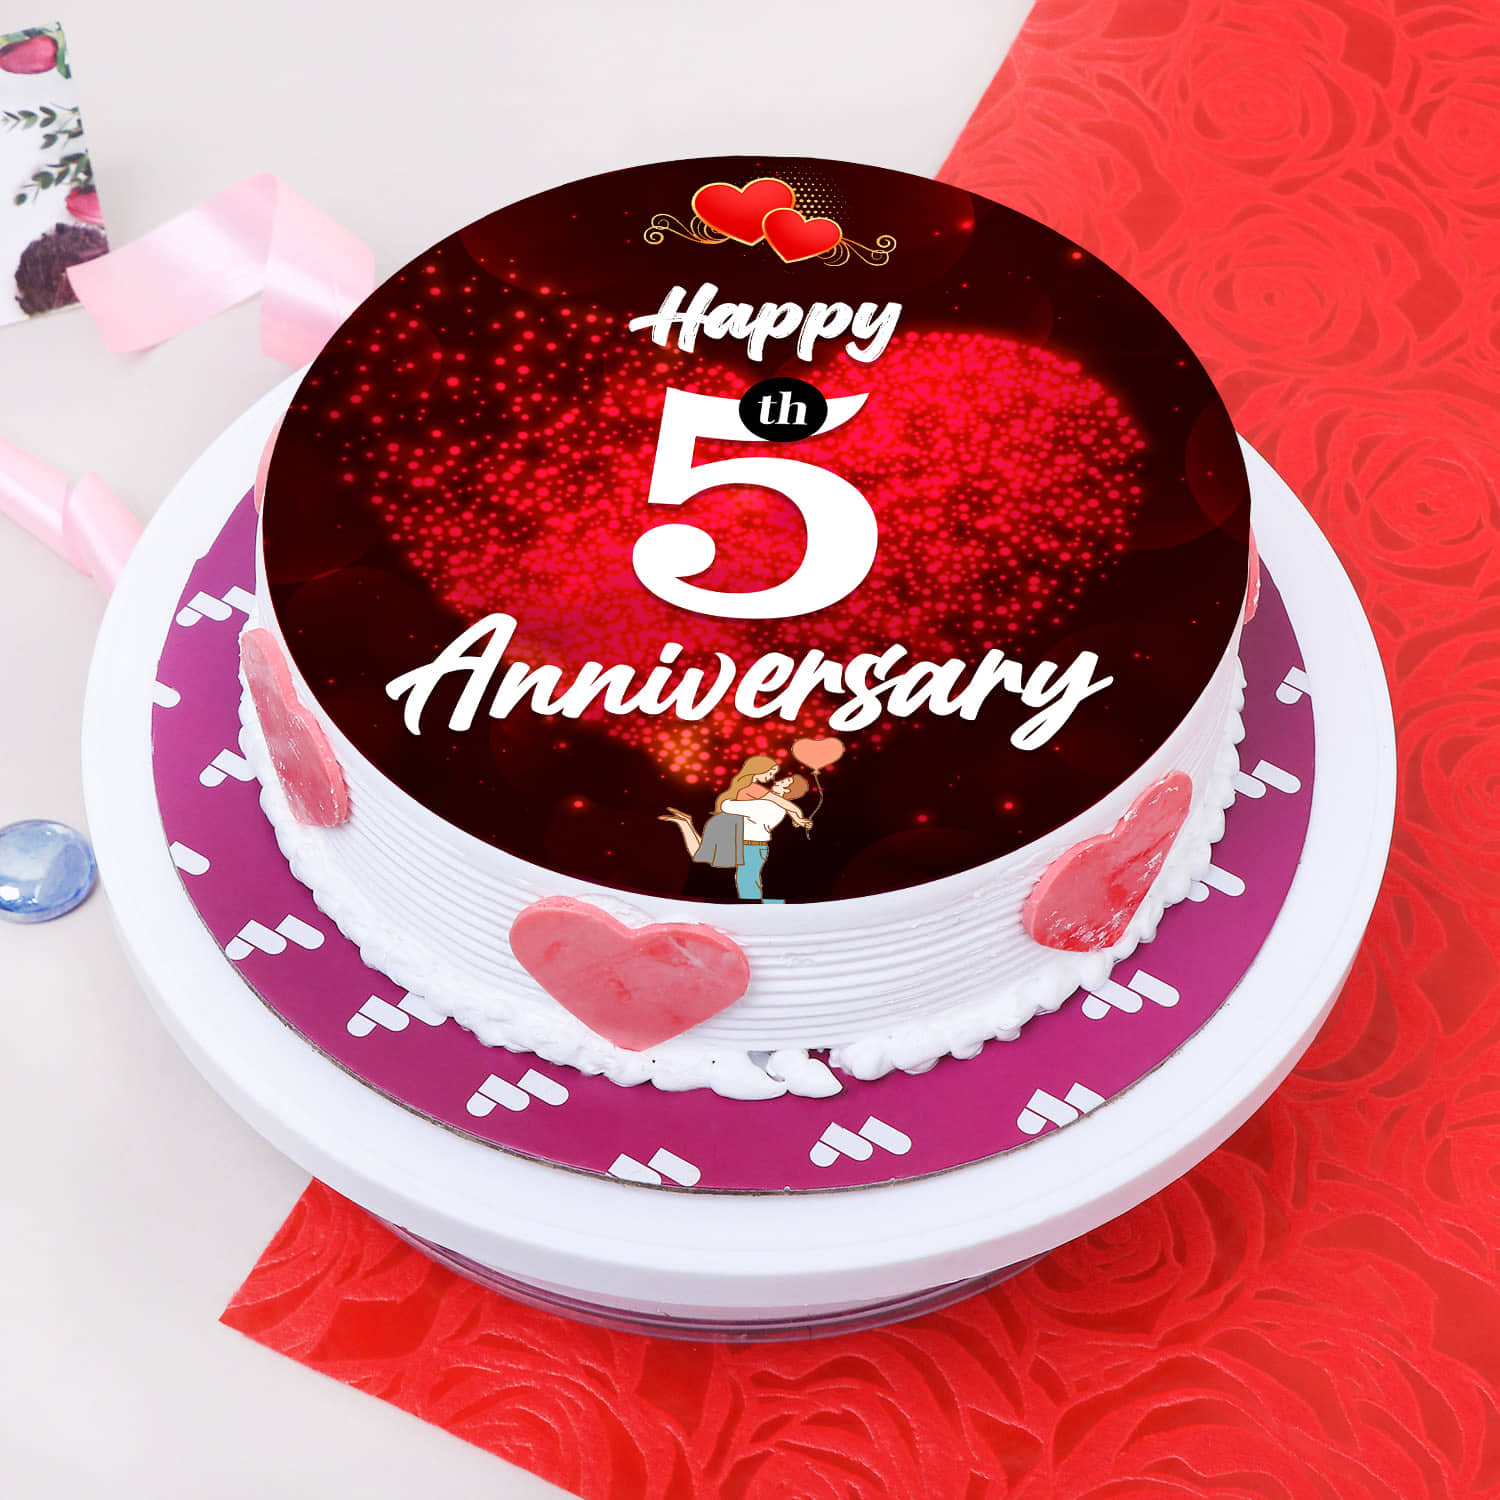 Order Top 5 Anniversary Cake in Your Budget| Cake Price on CakenGifts.in -  Upstart